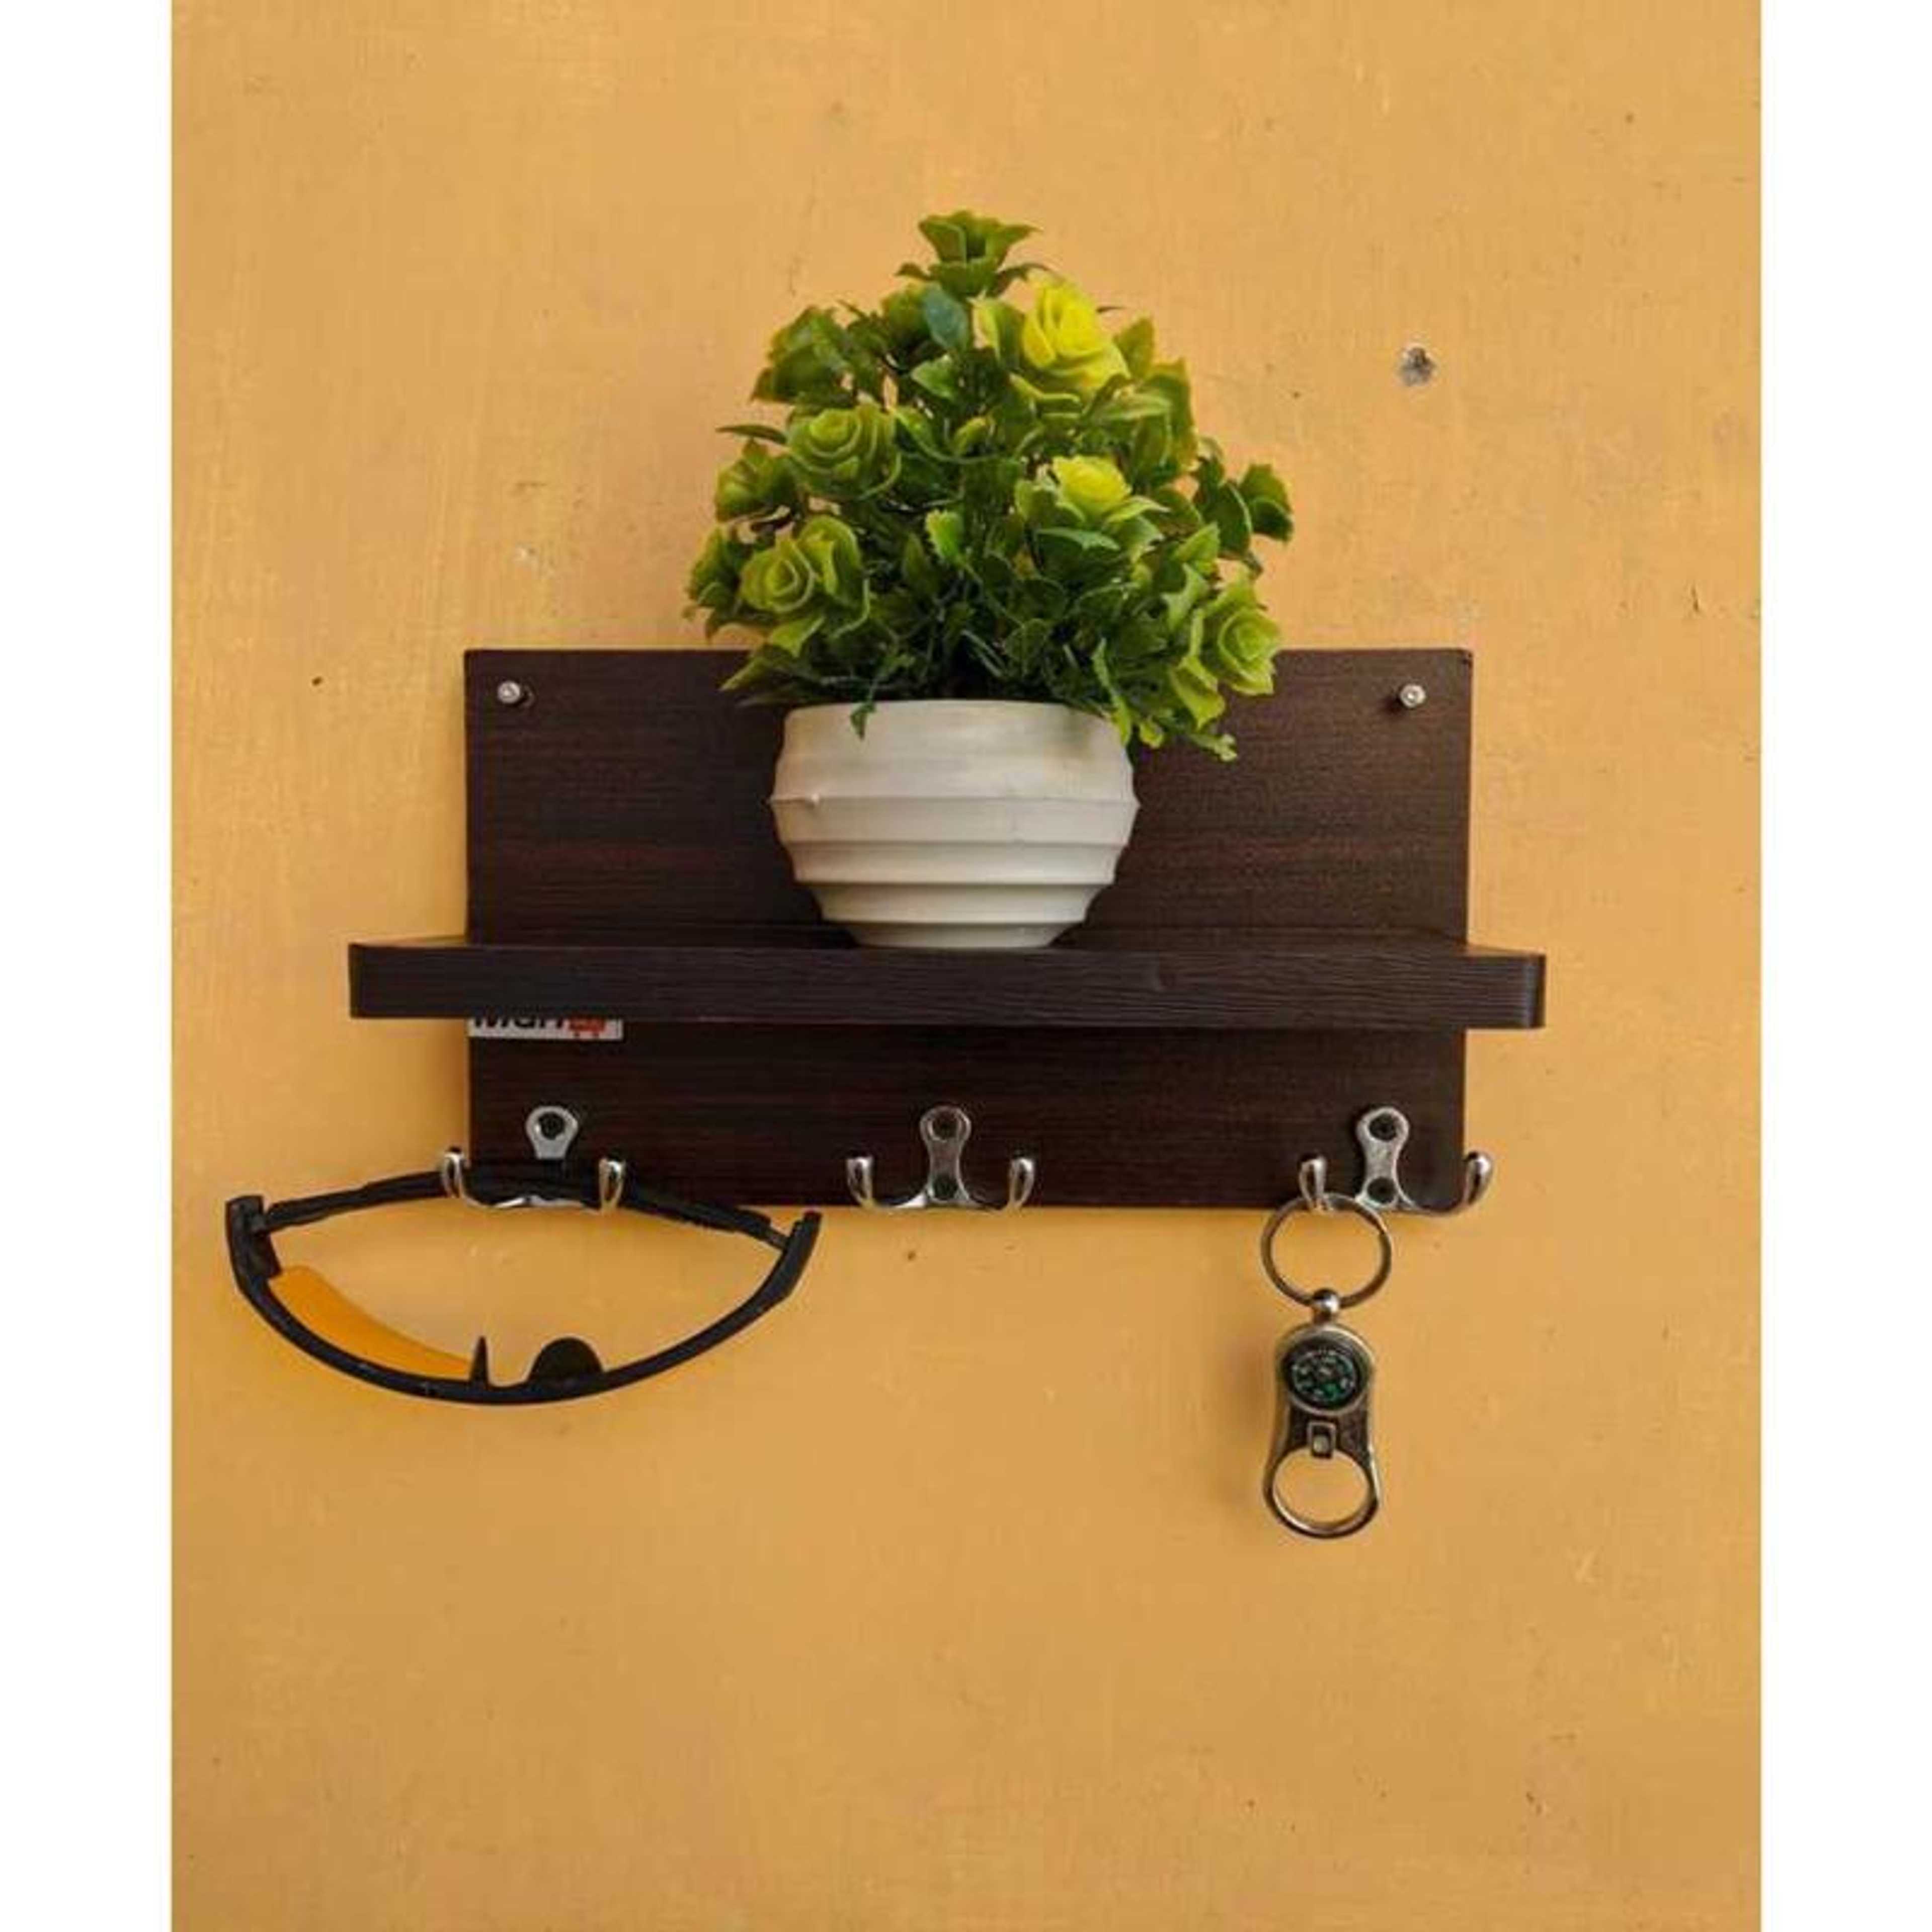 Key Holder Key rack Stand for Wall Office & Home Decorative Antique Design no 04 Official Mart89 Branded Product